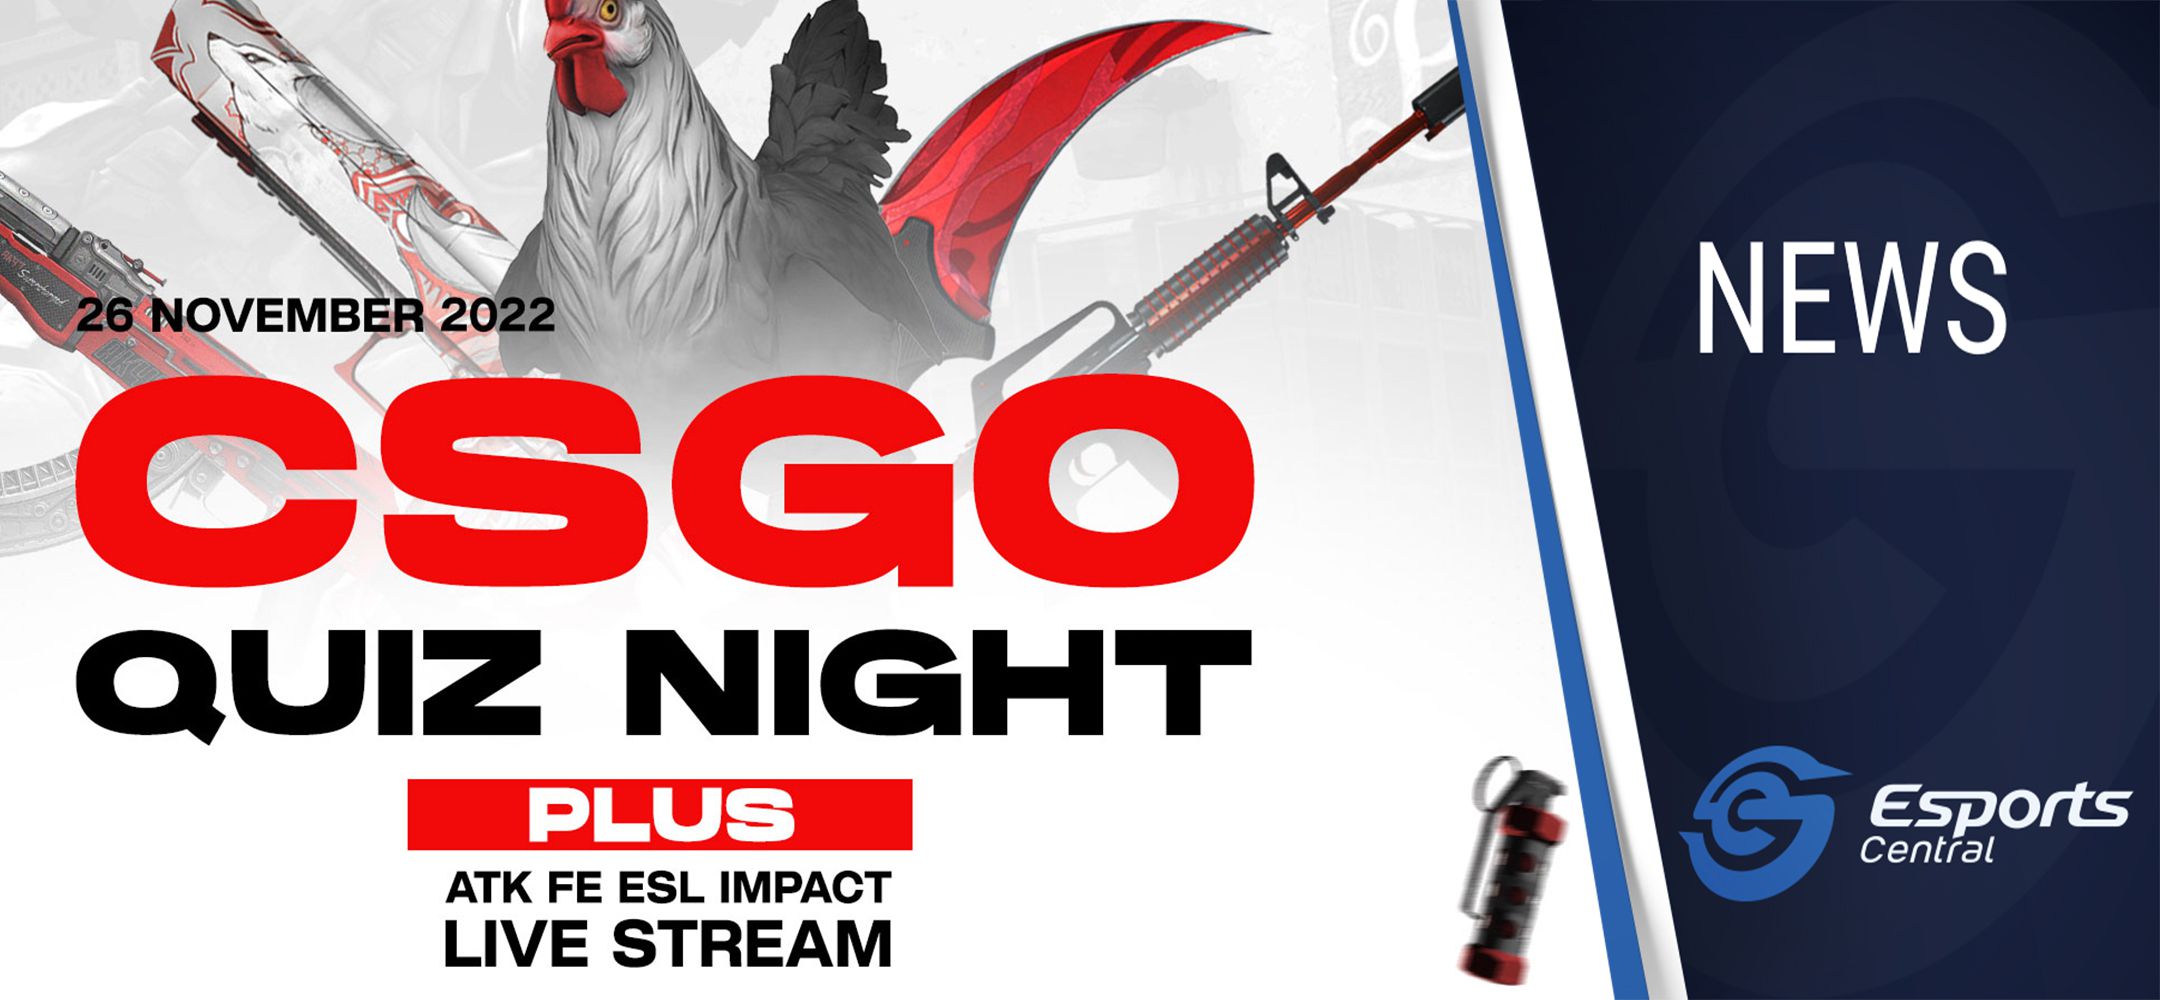 CSGO Quiz Night and ESL Impact S2 watch party at ATK Arena